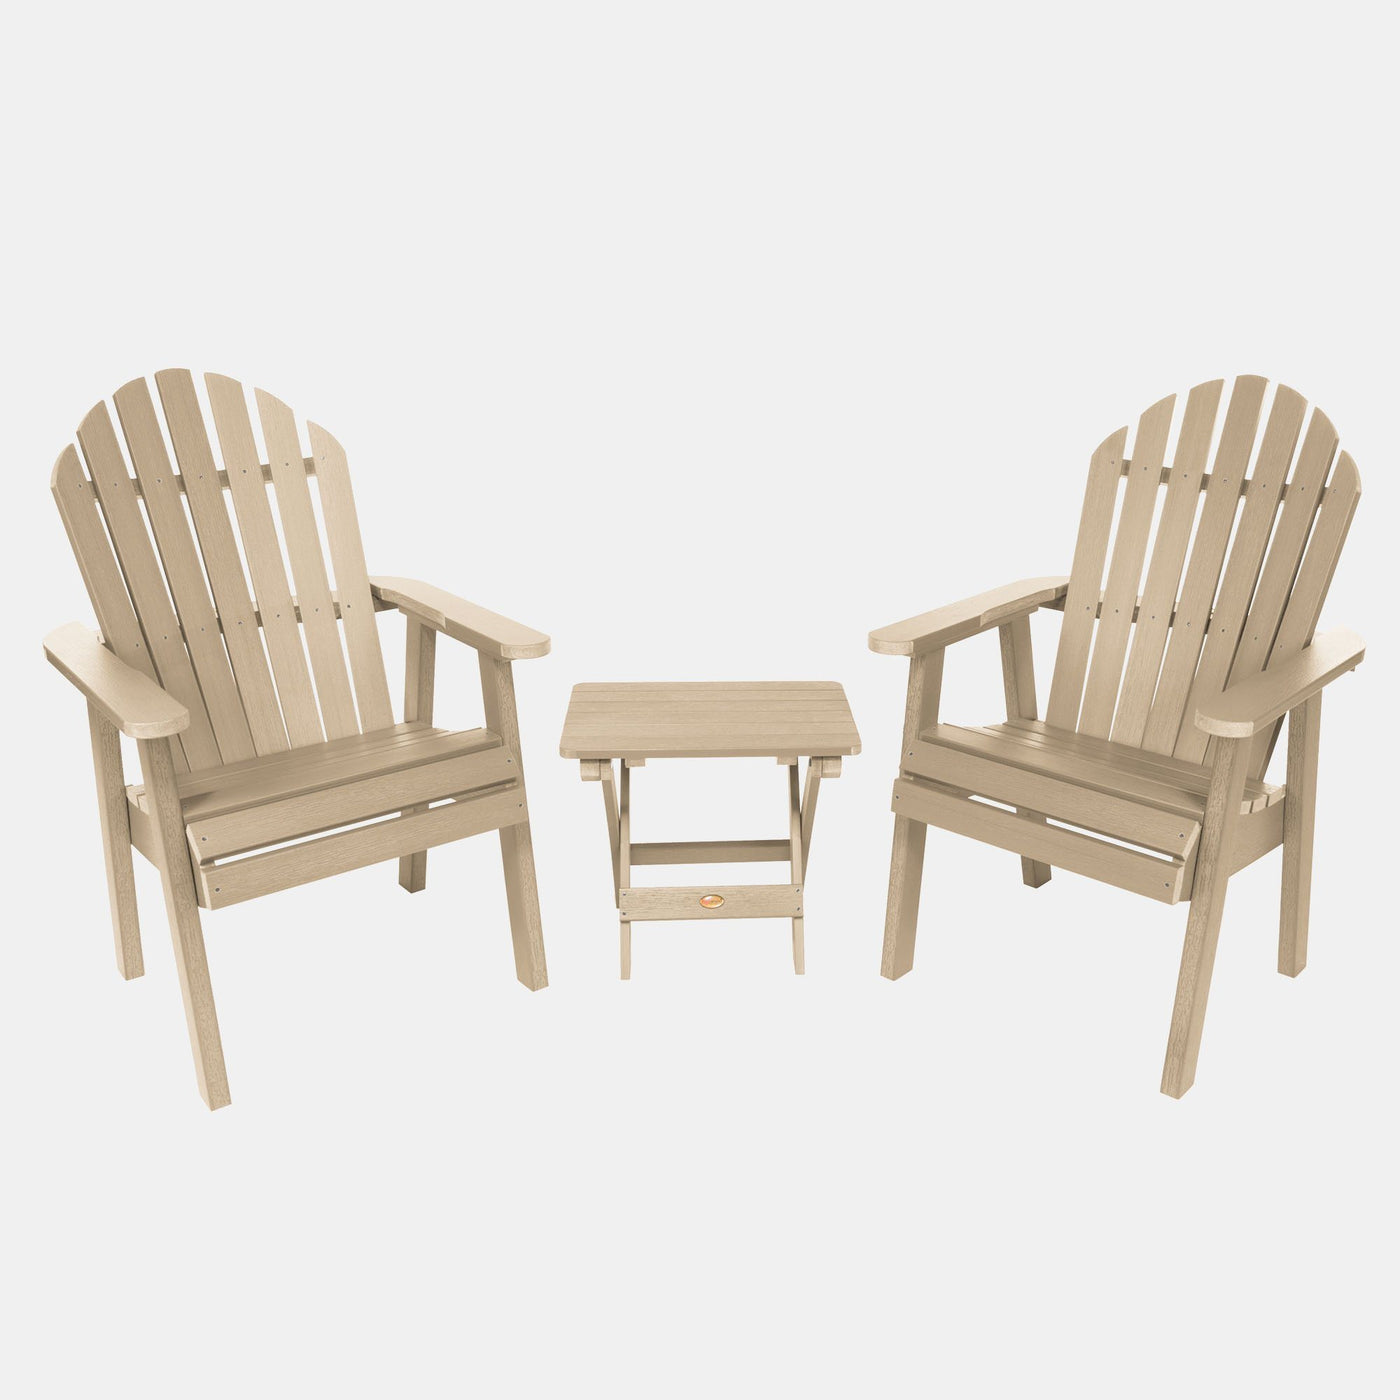 2 Hamilton Deck Chairs with Folding Side Table Highwood USA Tuscan Taupe 